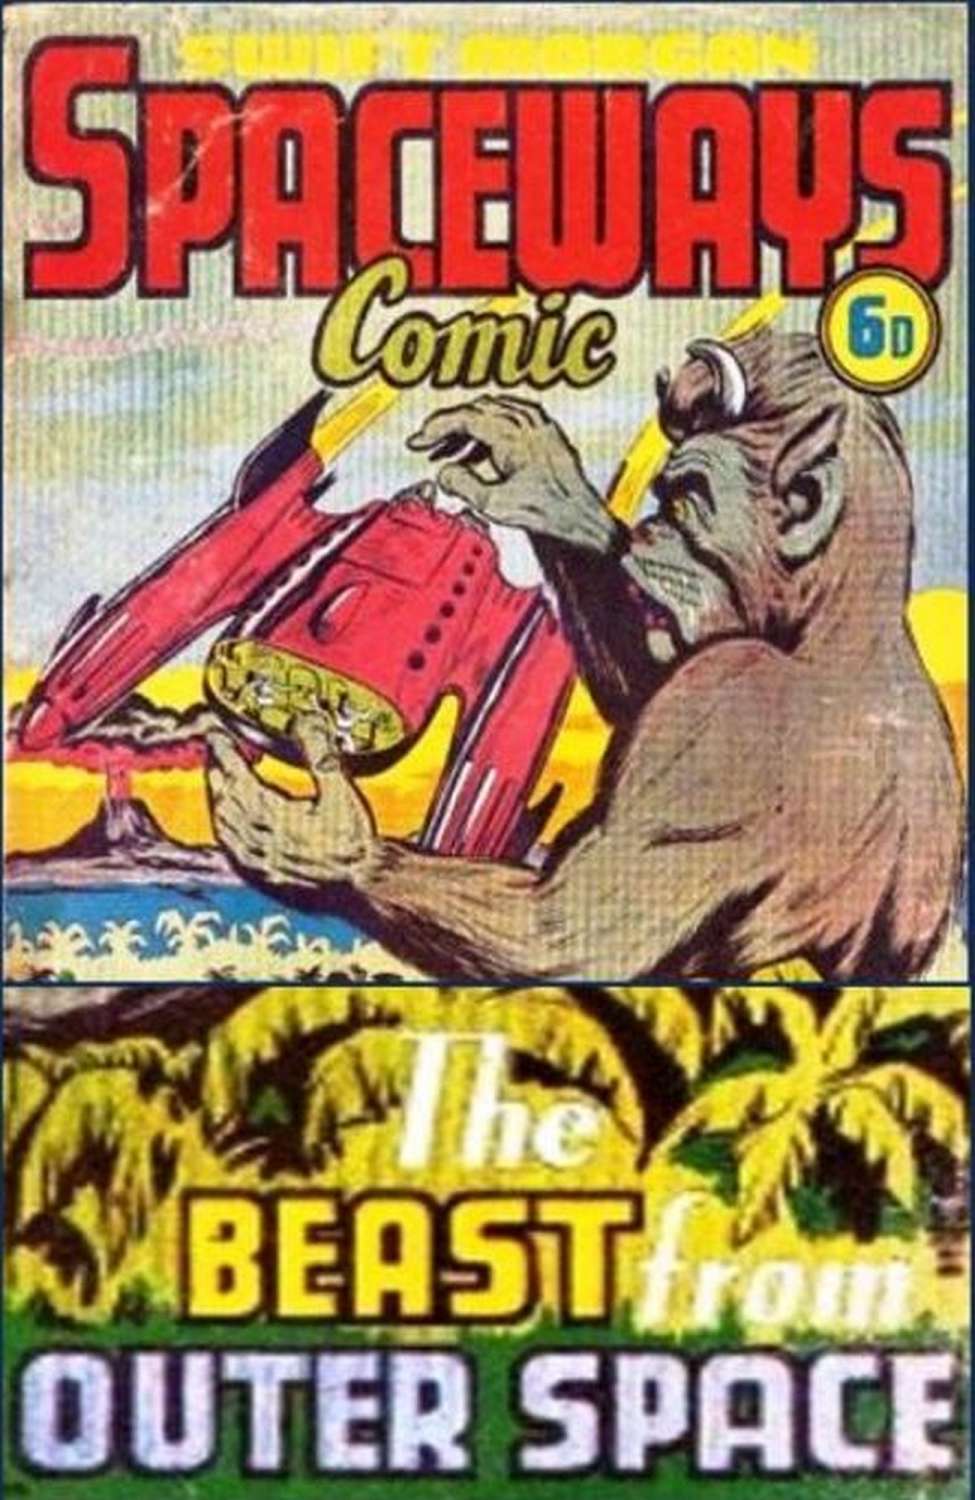 Comic Book Cover For Swift Morgan and the Beast From Outer Space